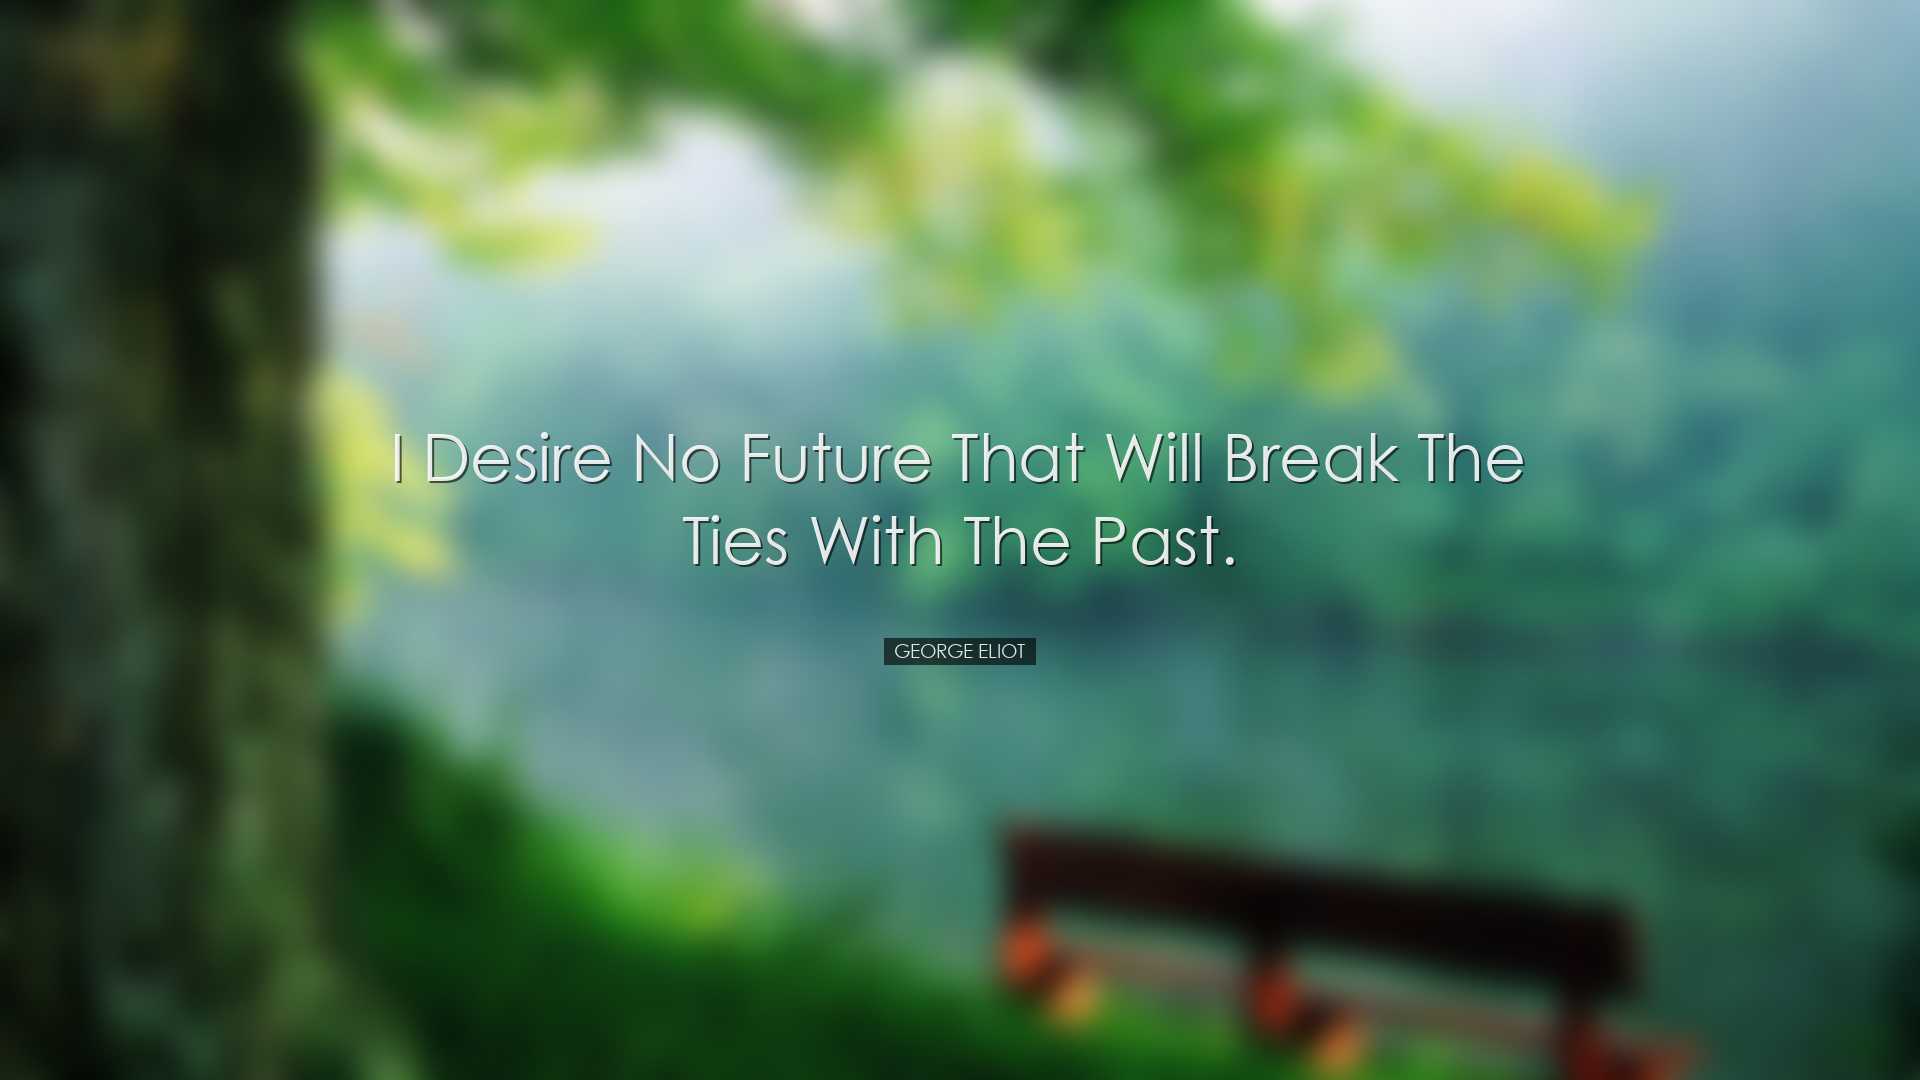 I desire no future that will break the ties with the past. - Georg